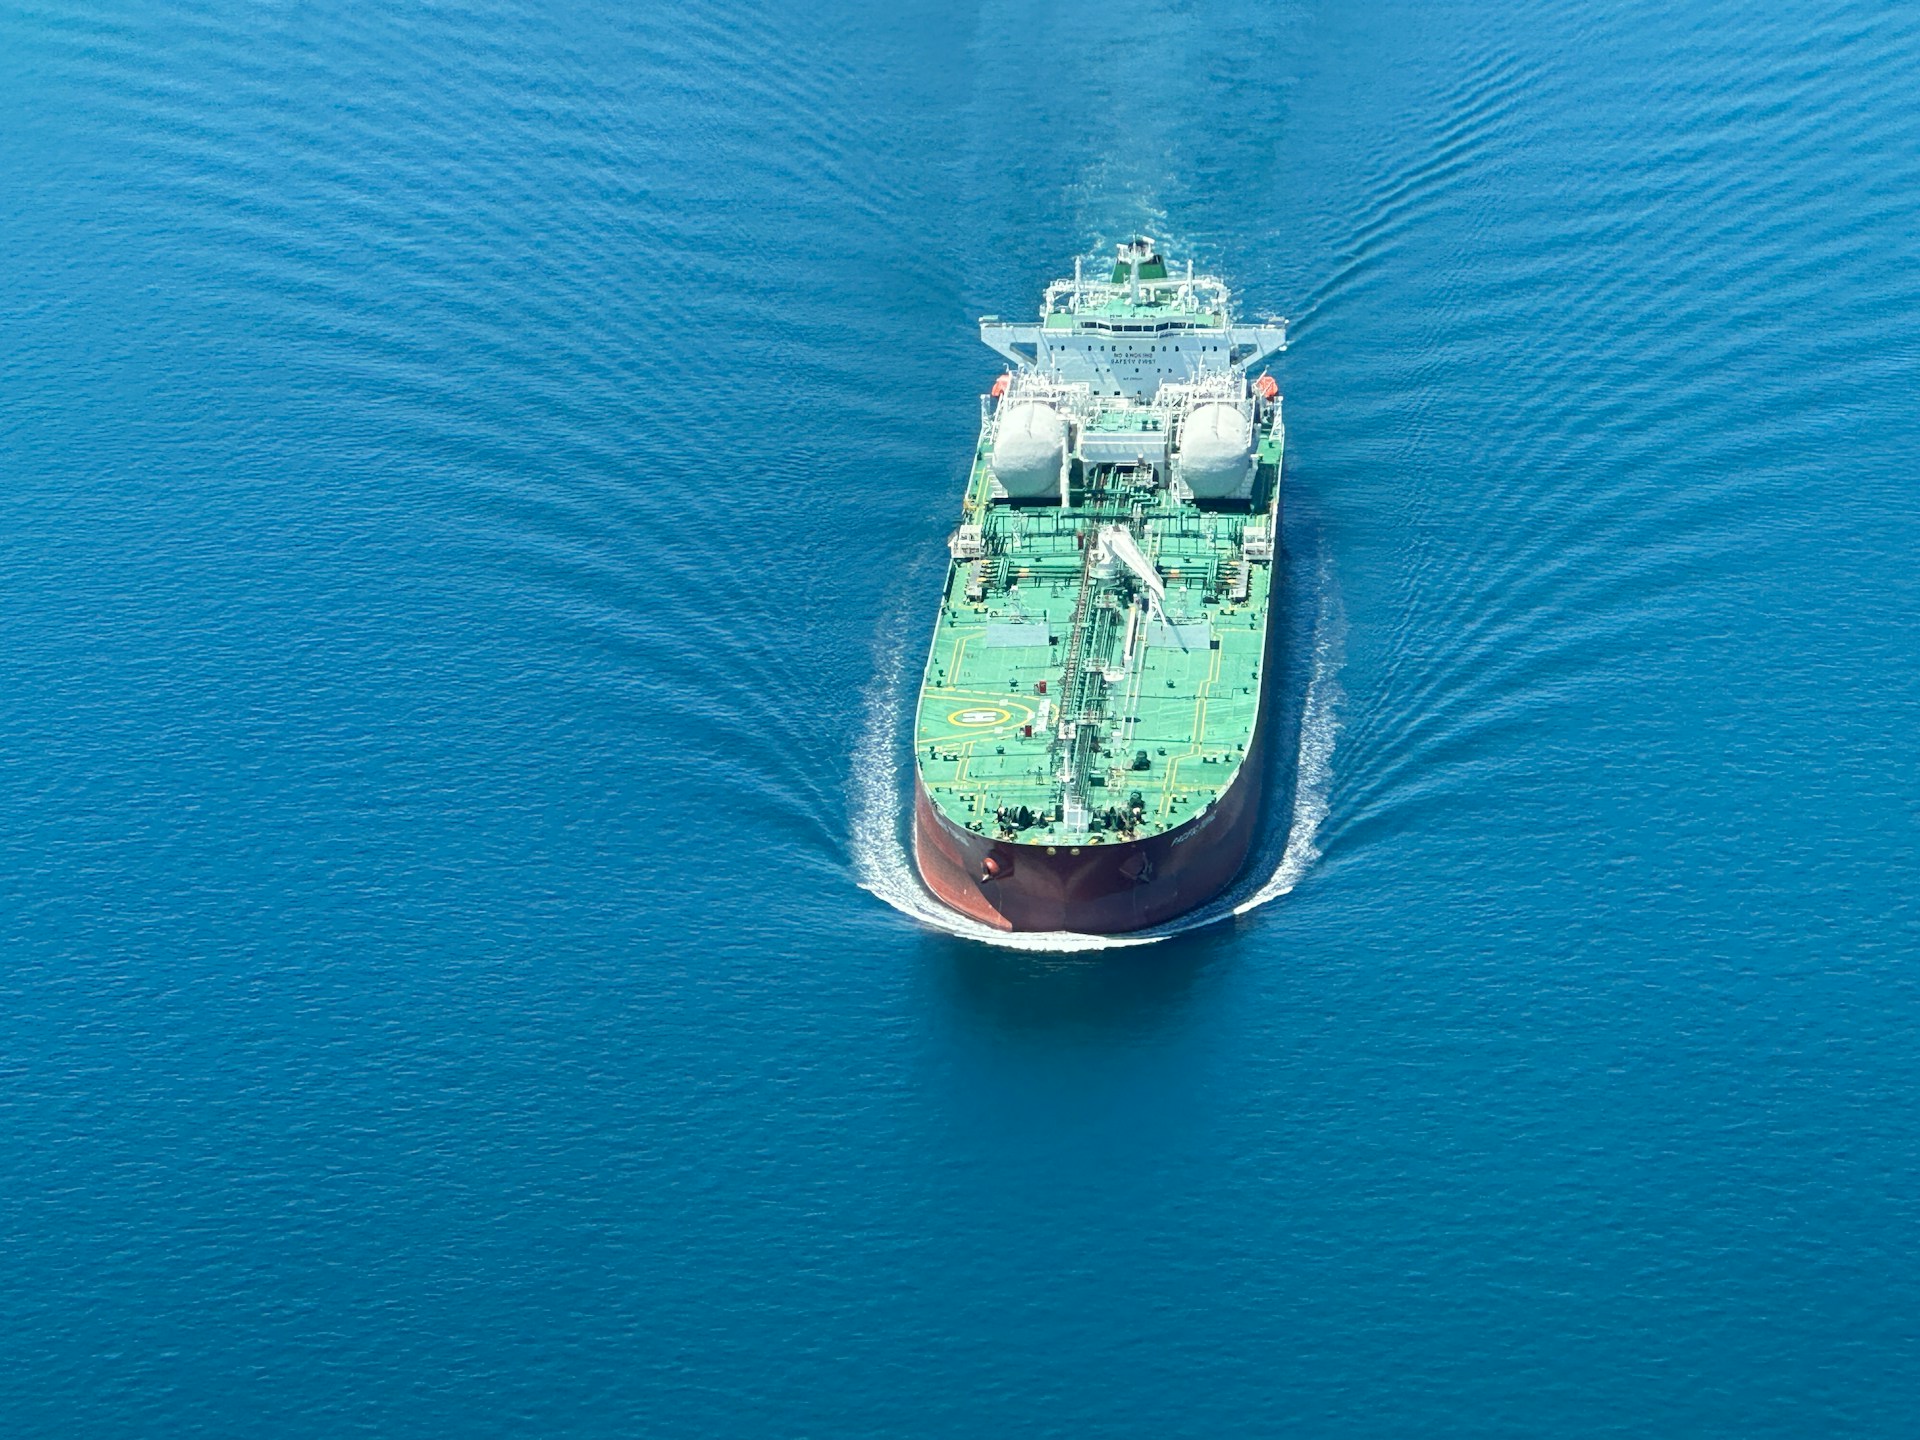 GEFO Secures 10 Chemical Tankers for Strategic Operations